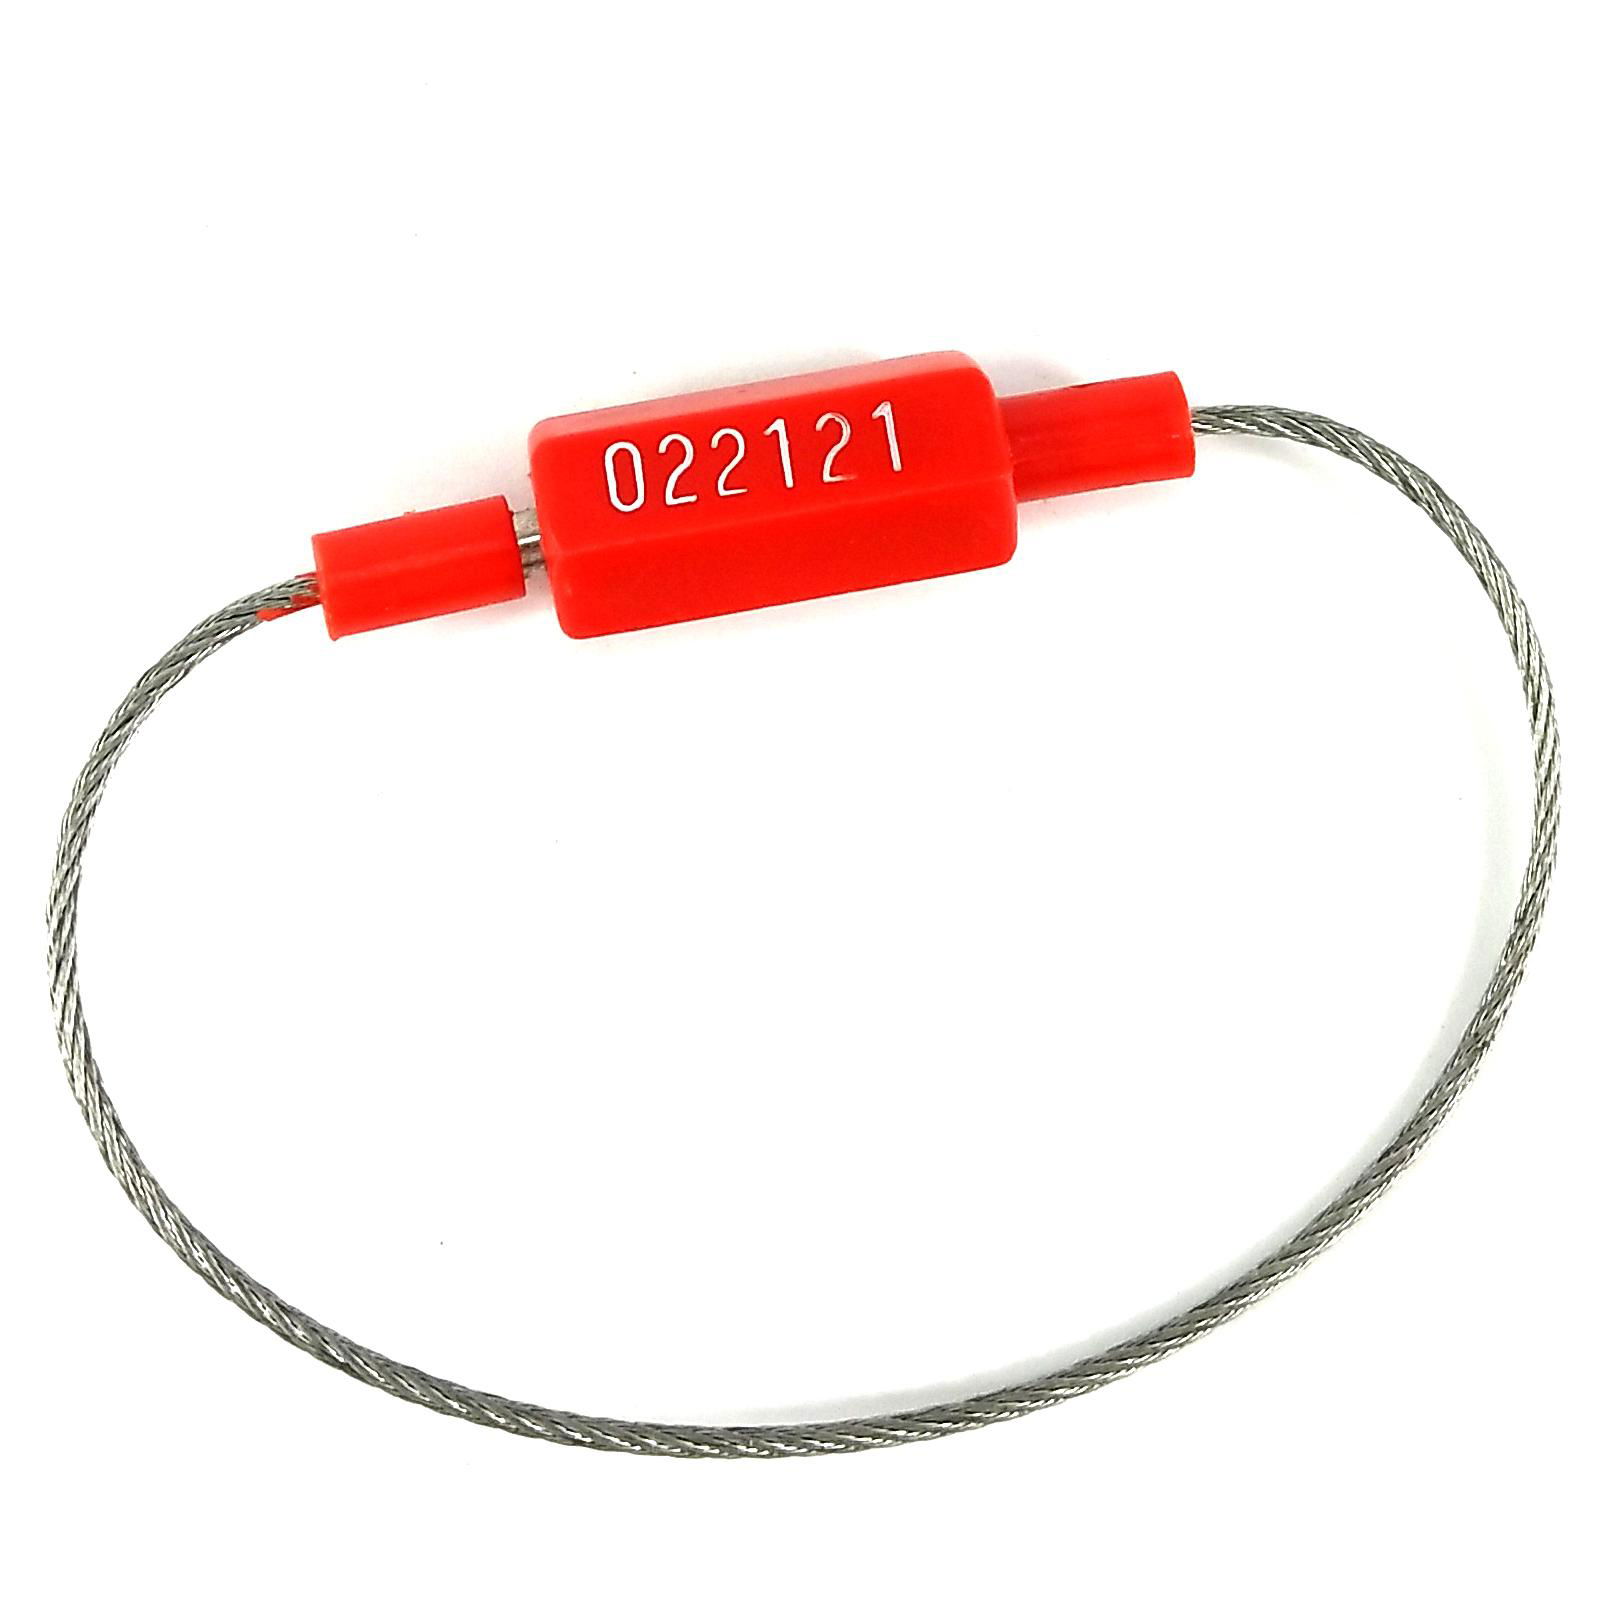 Fixed-Length Cable Security Seals 5